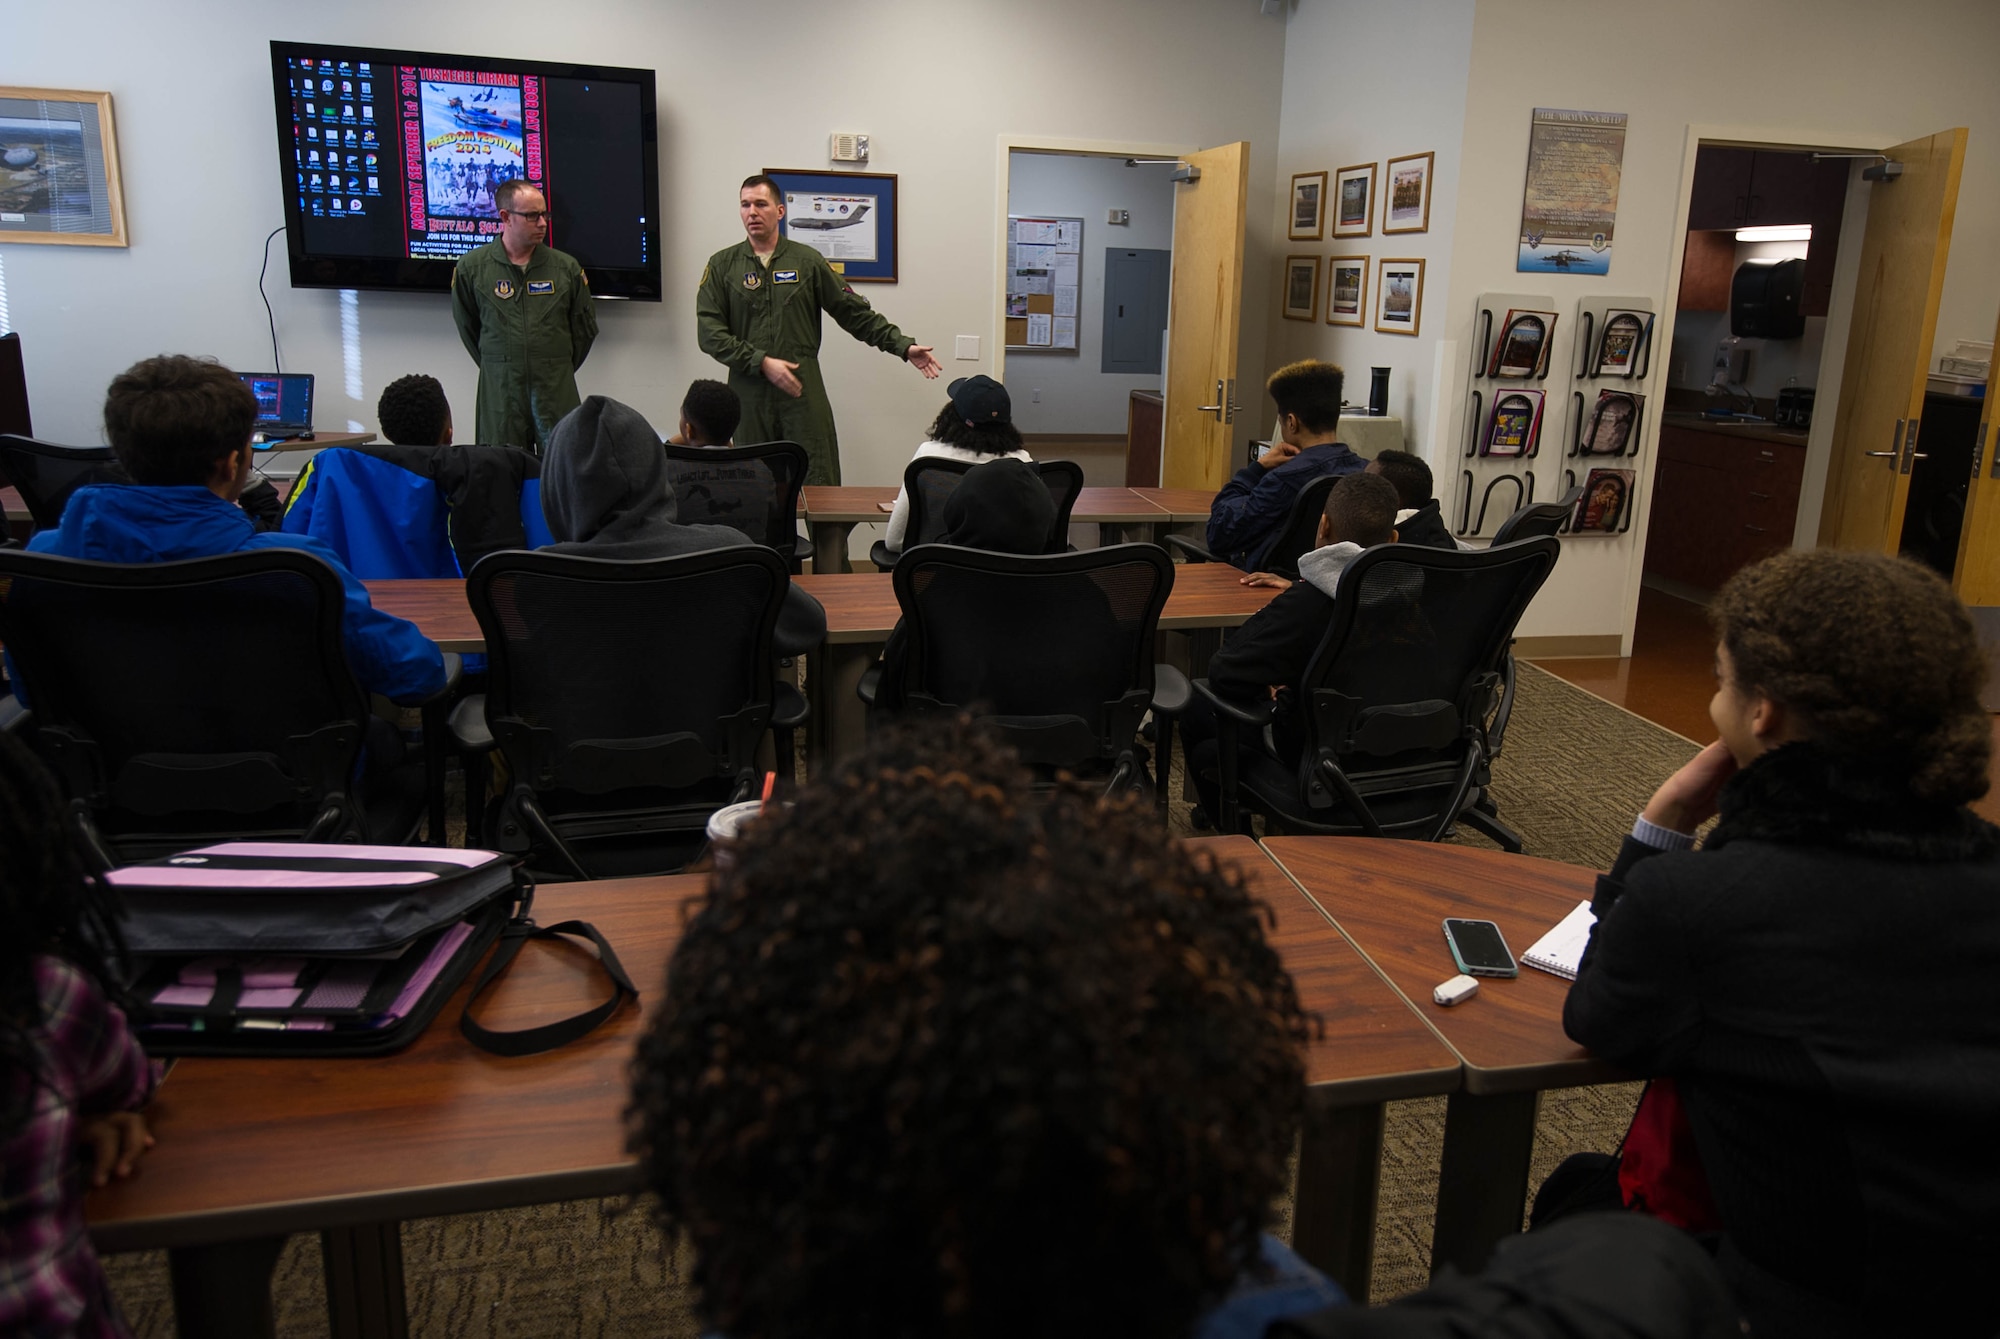 1Lt. Shay Dennis and SrA Glenn Bartle speak about their aviation career fields to members of the Red-Tailed Hawks Flying Club Feb. 11, 2017, on Joint Base Lewis-McChord, Wash. Dennis and Bartle are assigned to the 446th Airlift Wing. (U.S. Air Force photo by David L. Yost)